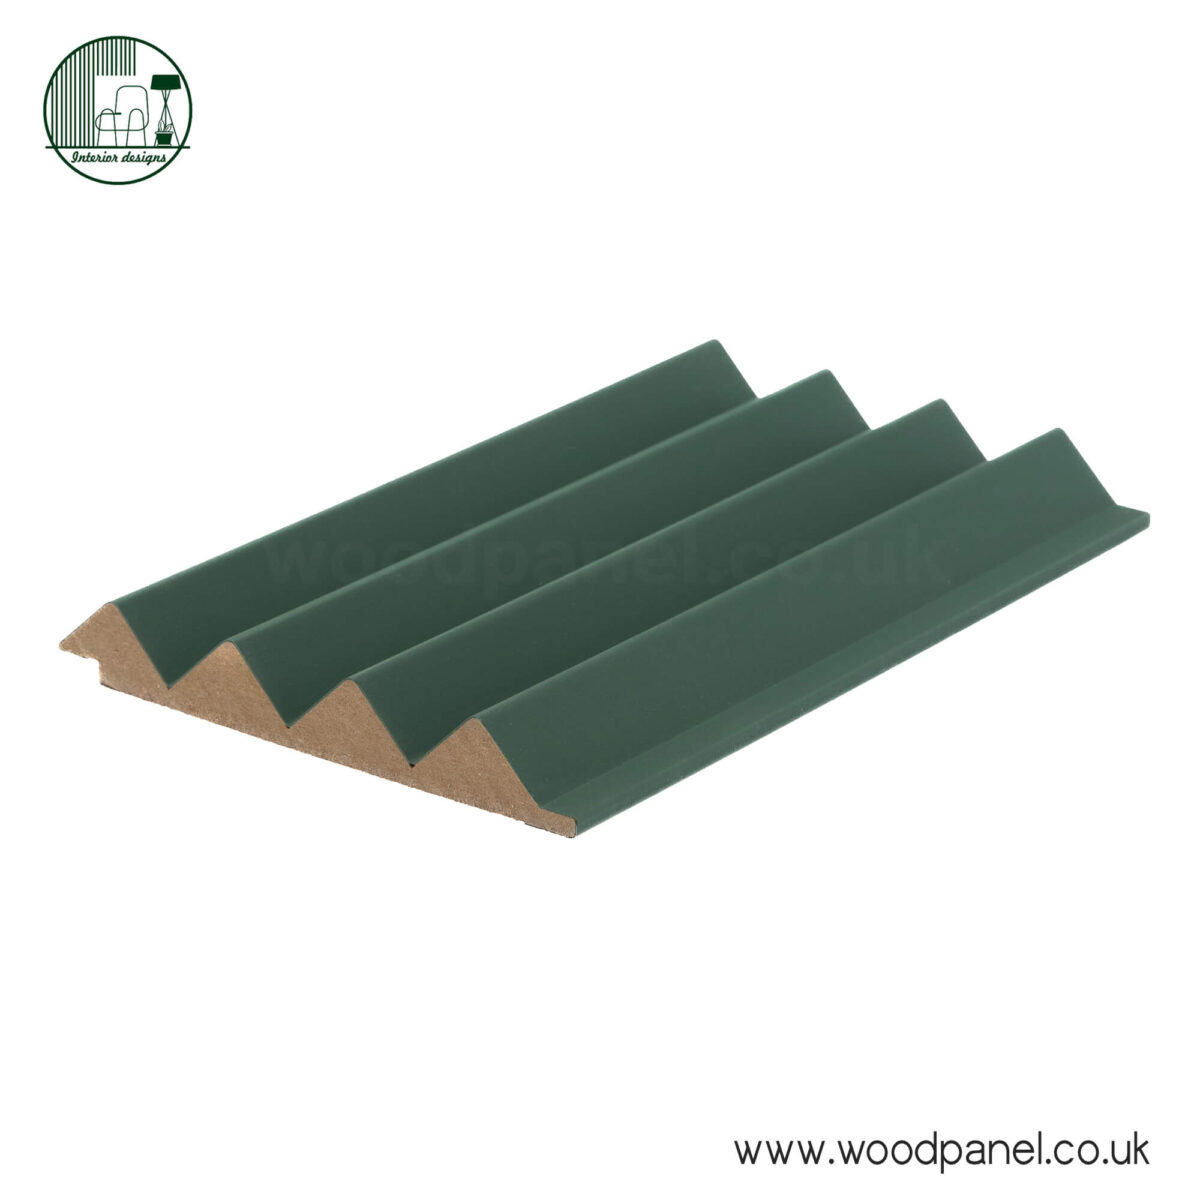 Synergy Wood Panel U606 Forest Green SOFT TOUCH ST122 6PCS in a pack